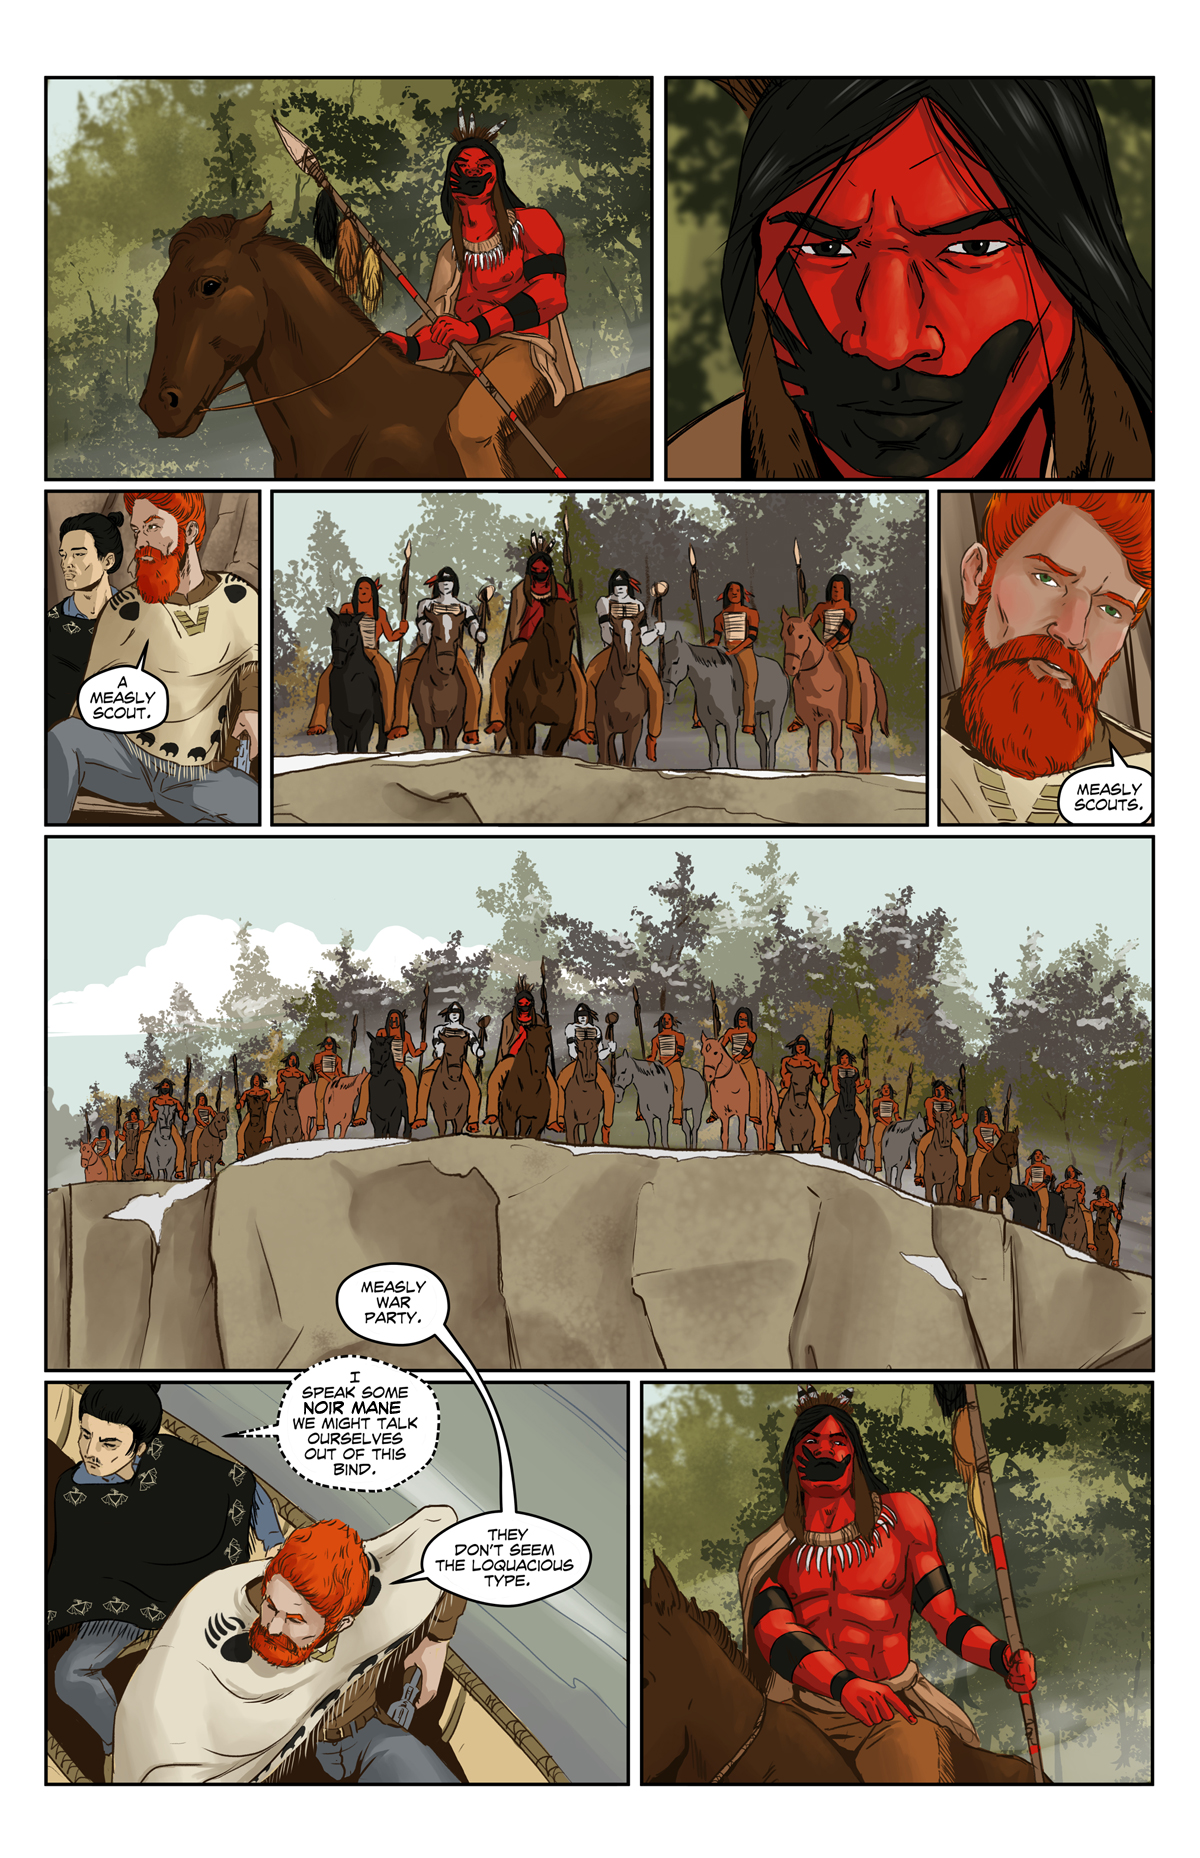 Episode 1, Page 3